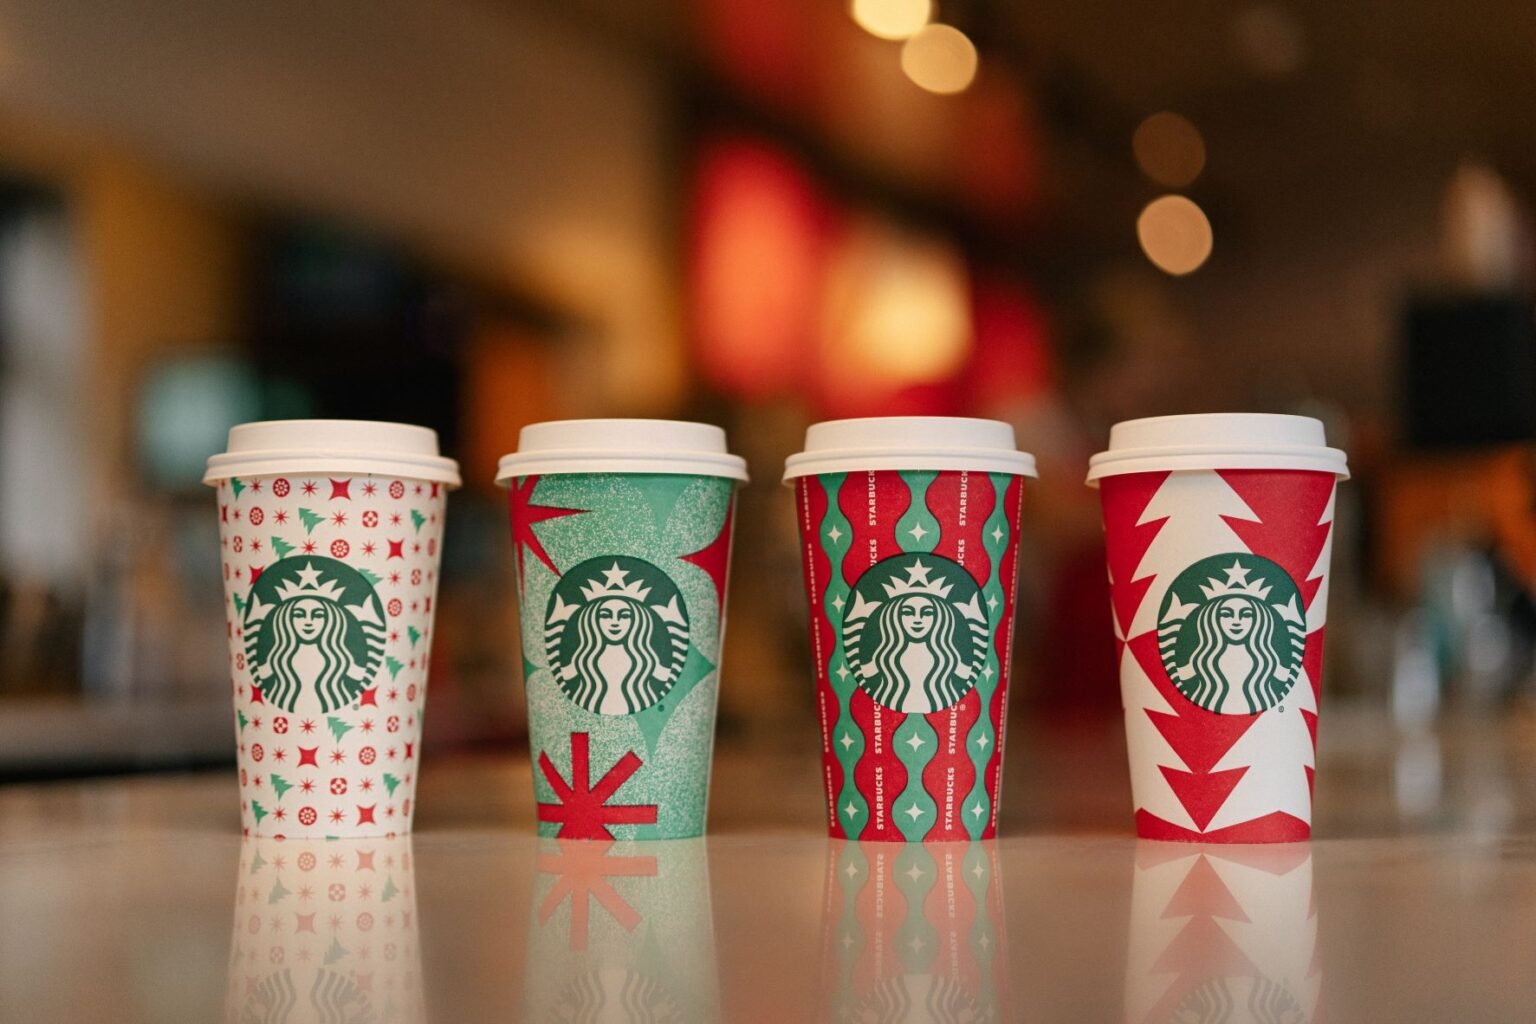 Starbucks-Red-Cup-Day